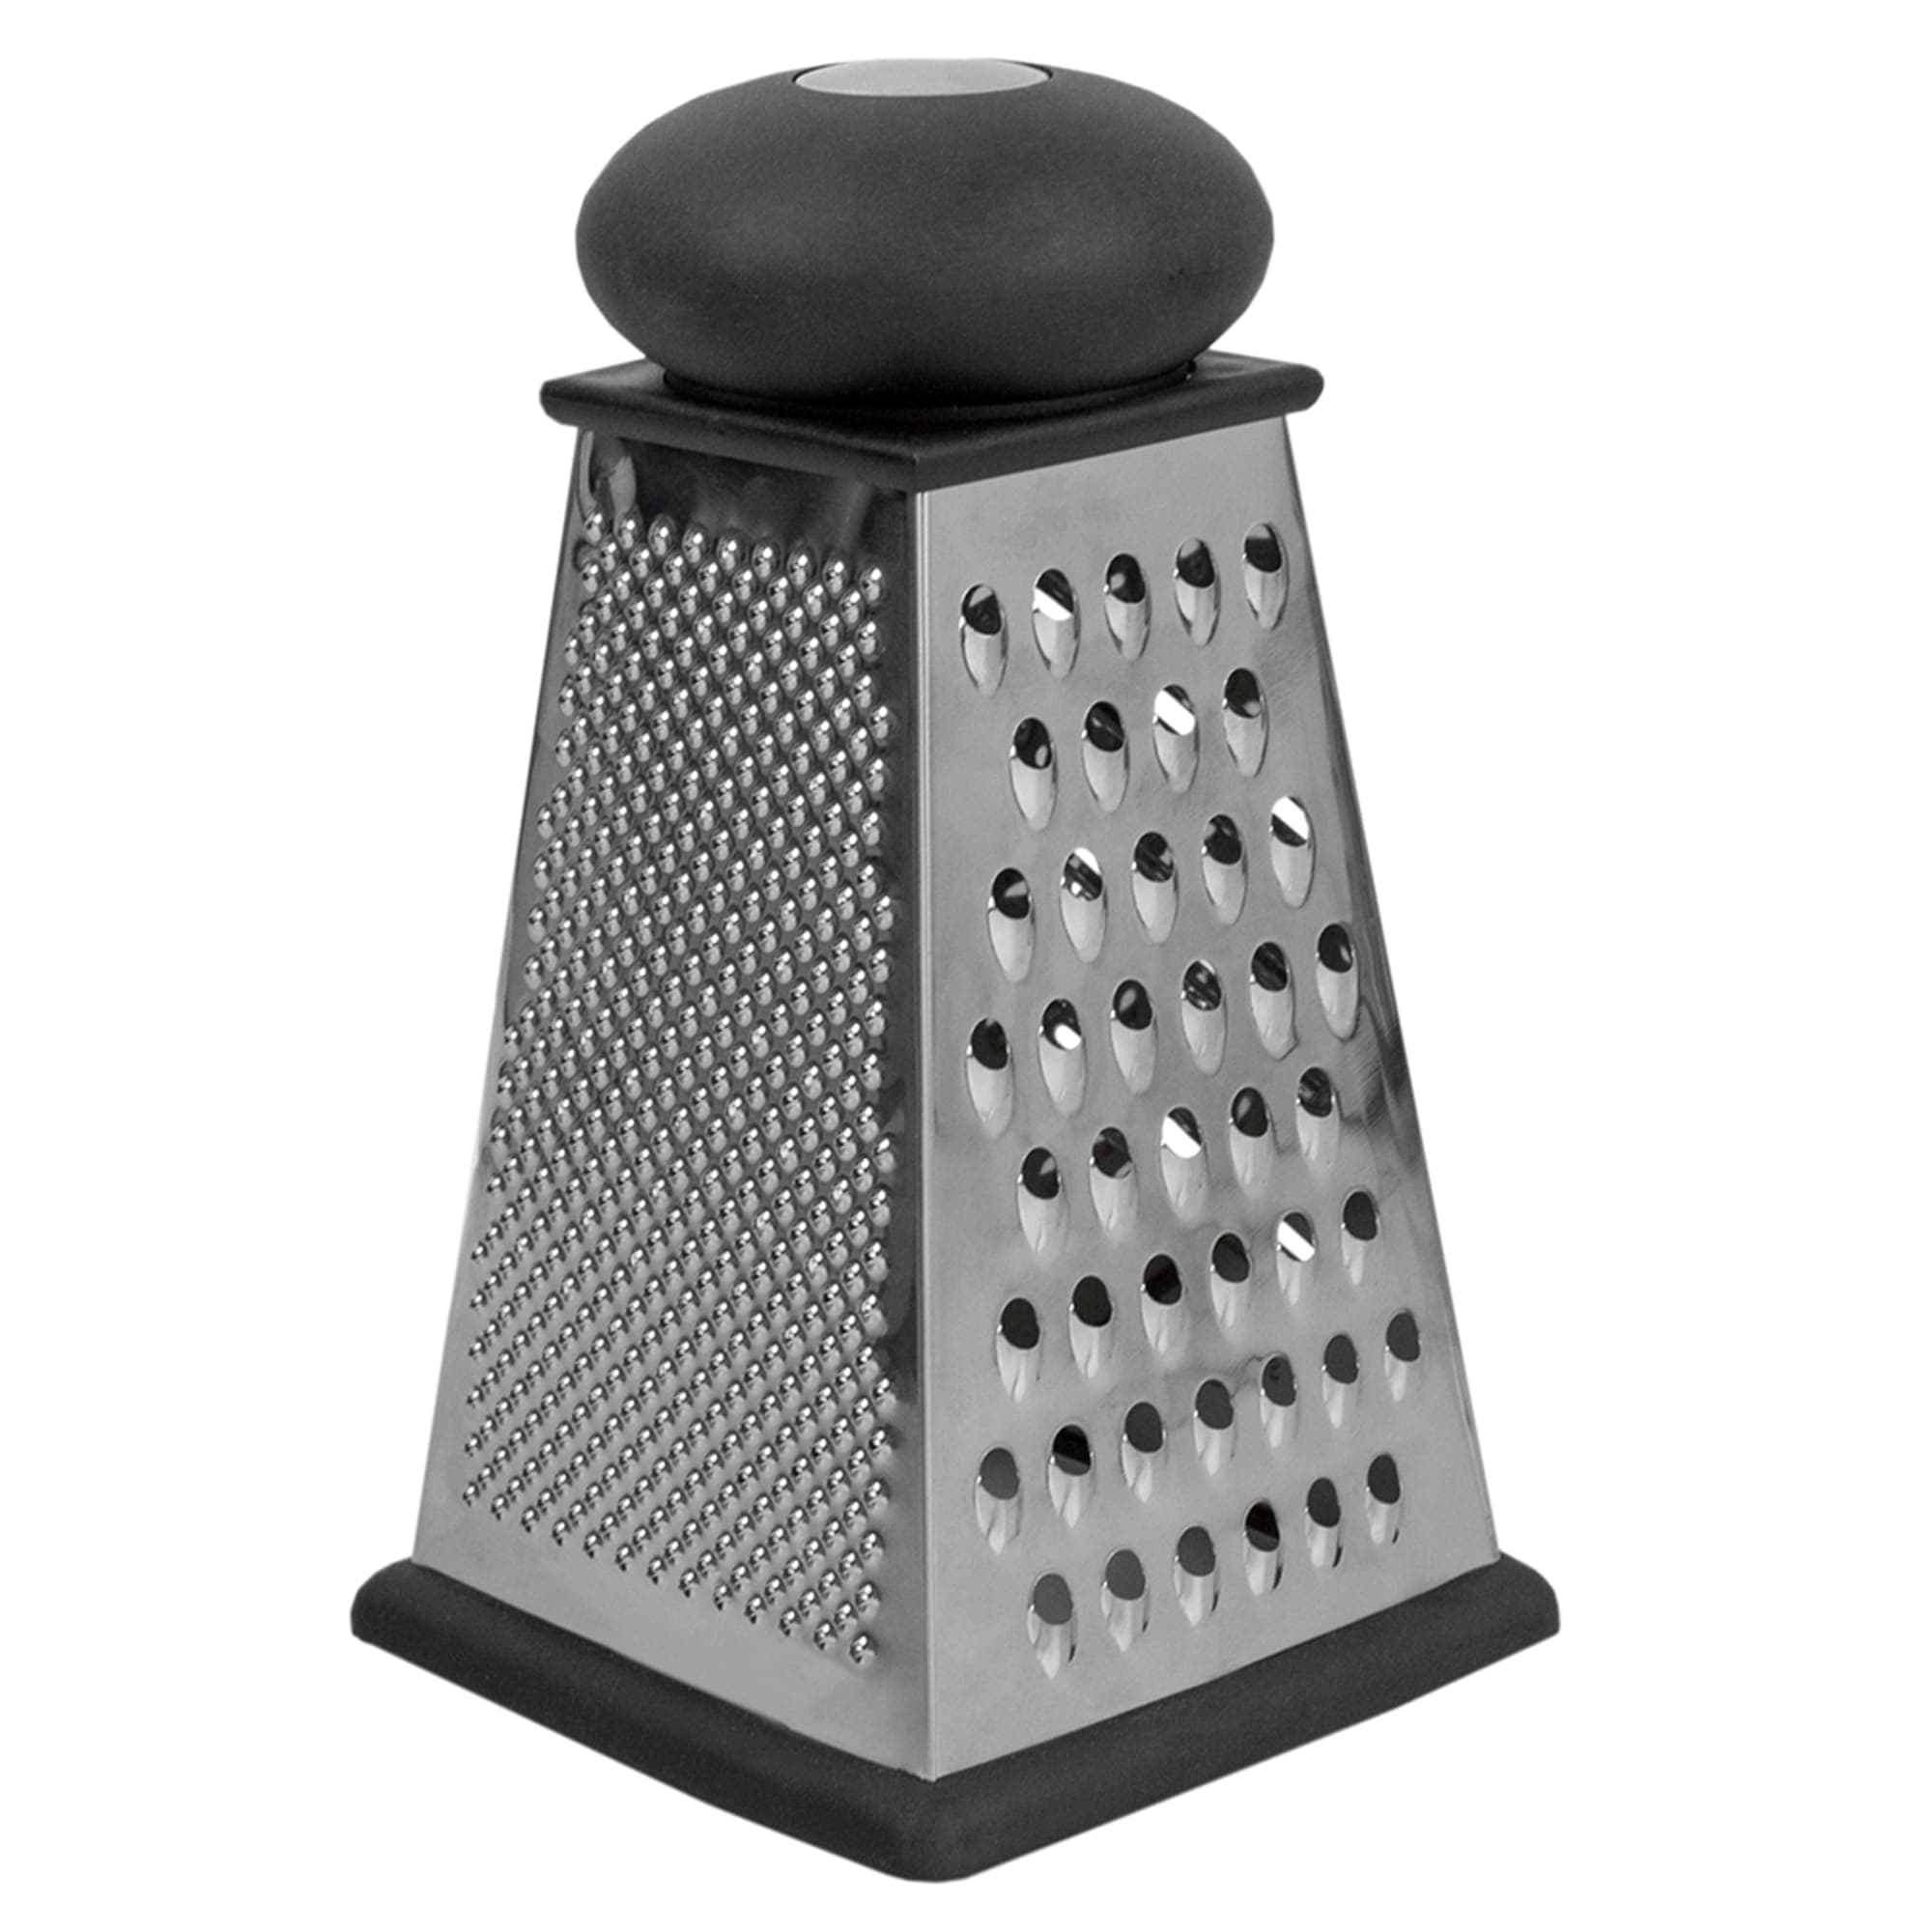 Home Basics 4-Sided Cheese Grater With Rubber Grip, Black $4.00 EACH, CASE PACK OF 24